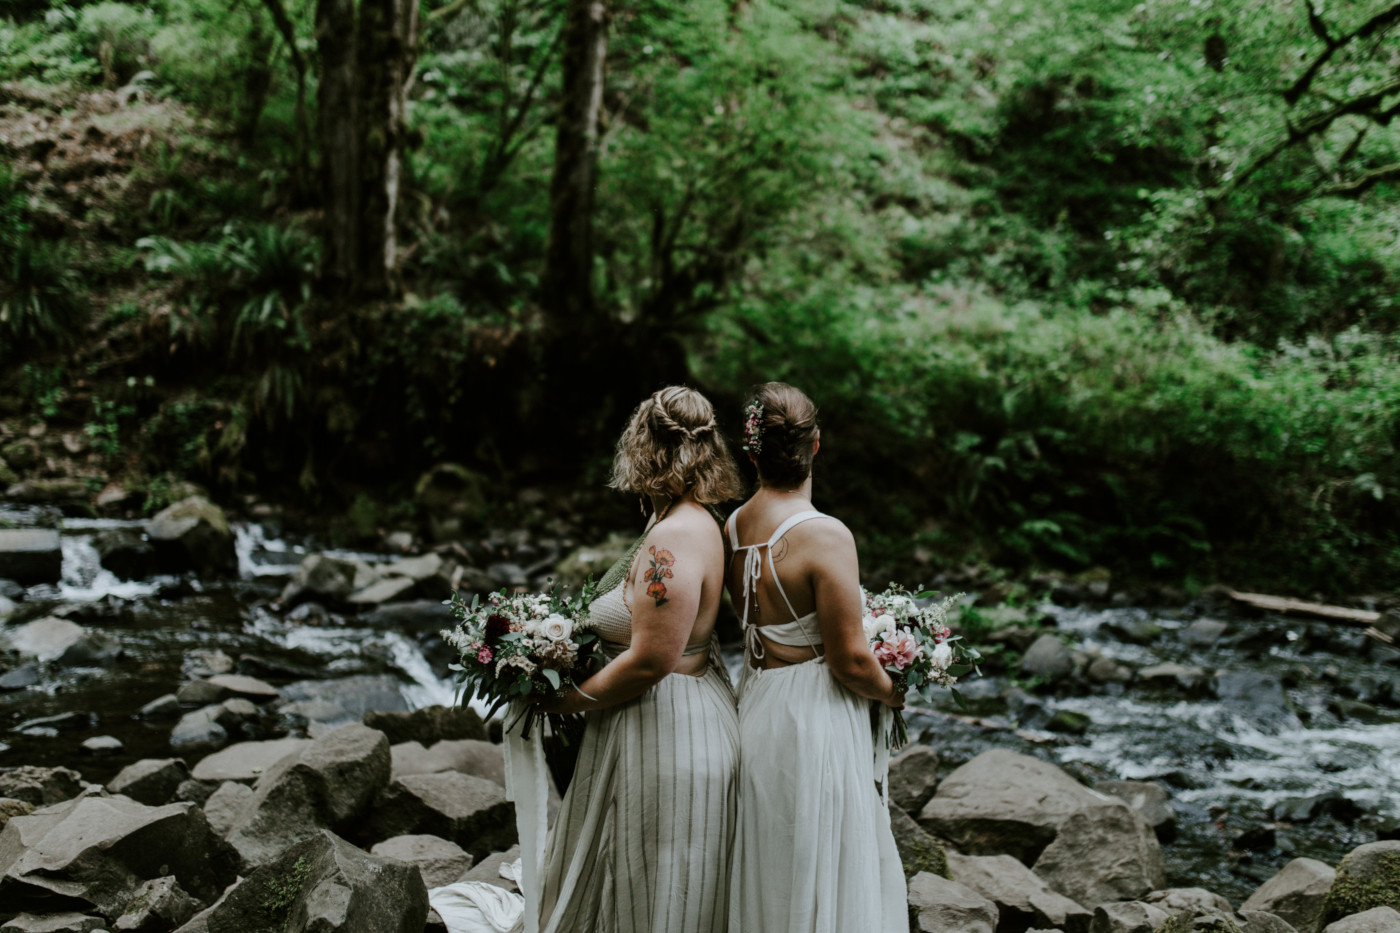 Kate and Audrey stand back to back. Elopement wedding photography at Bridal Veil Falls by Sienna Plus Josh.